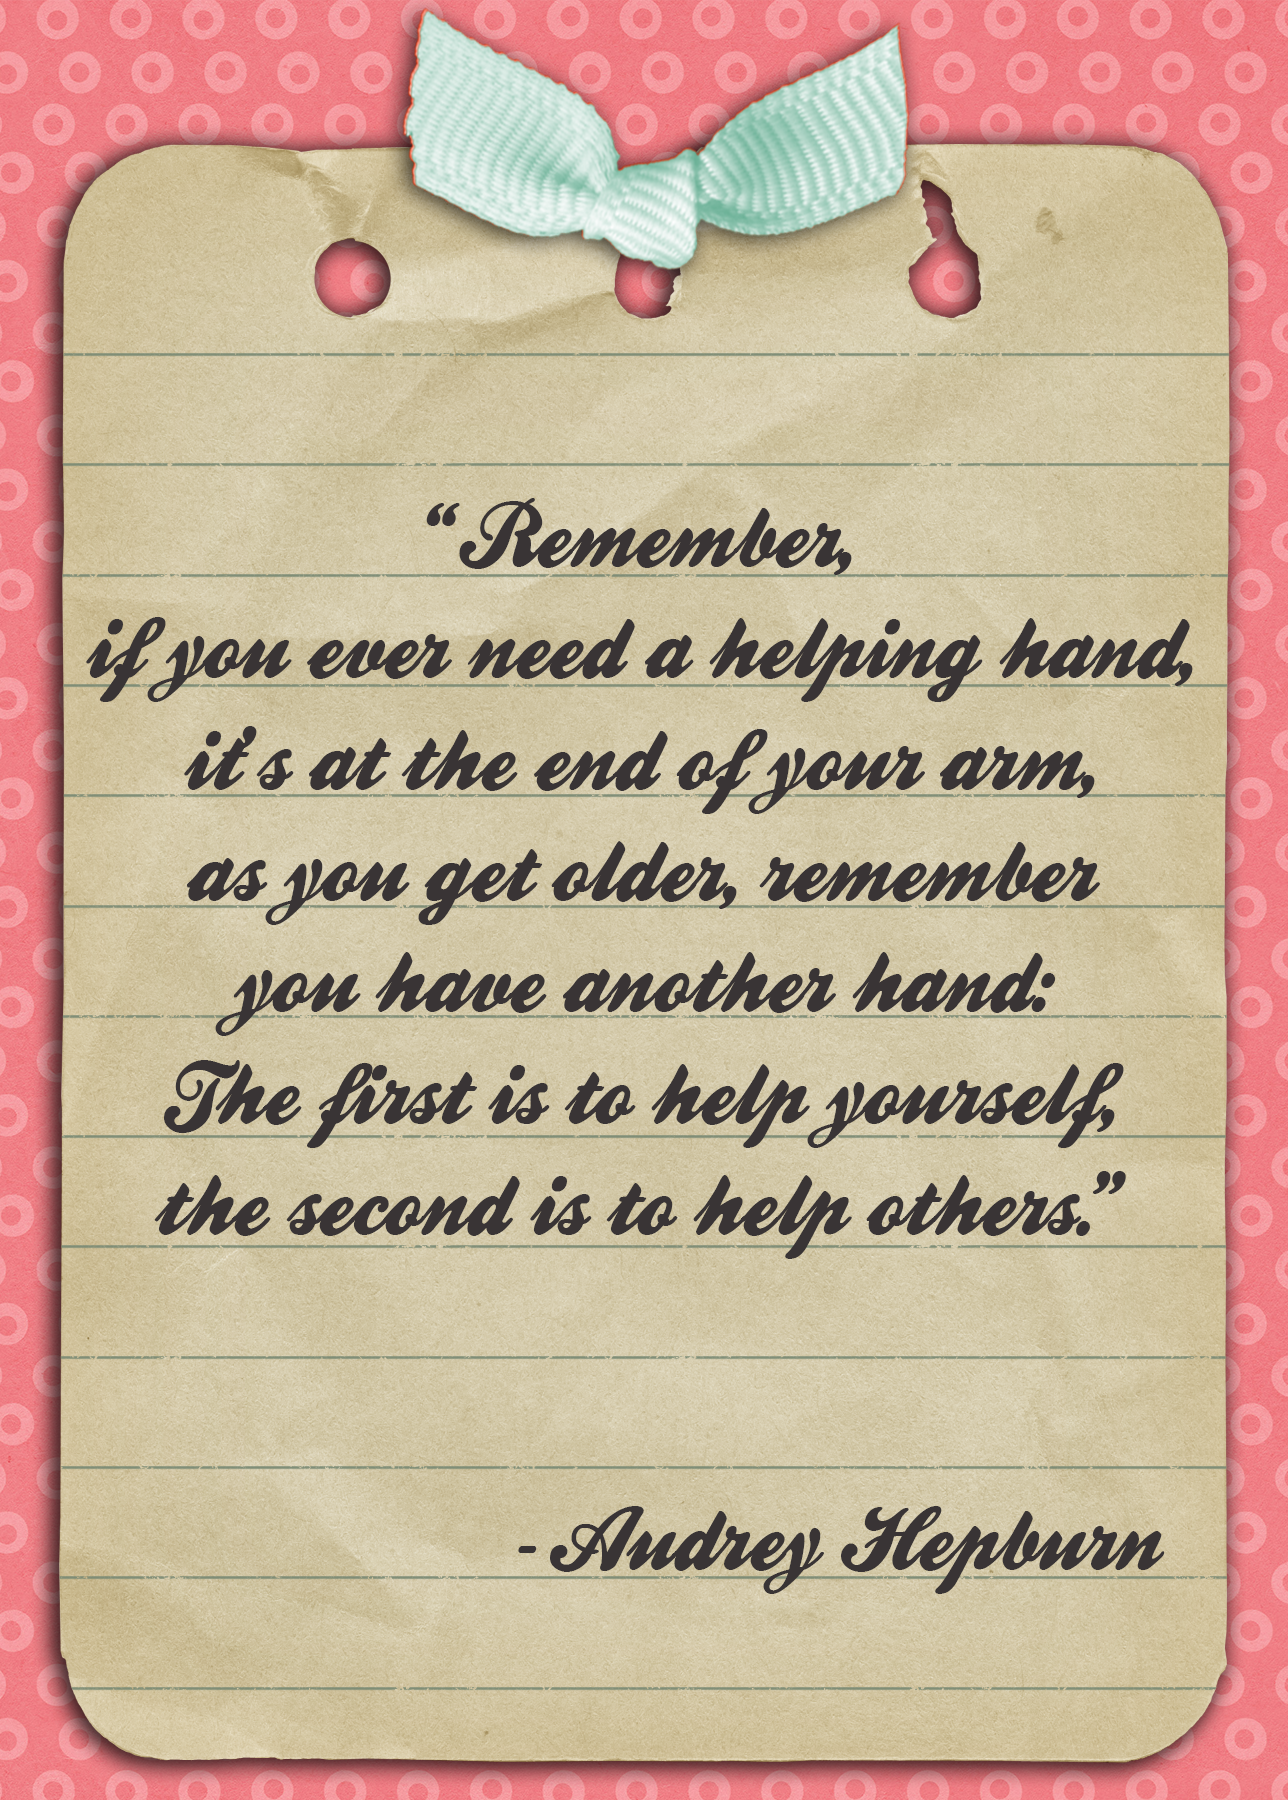 Quotes About Helping Others. QuotesGram